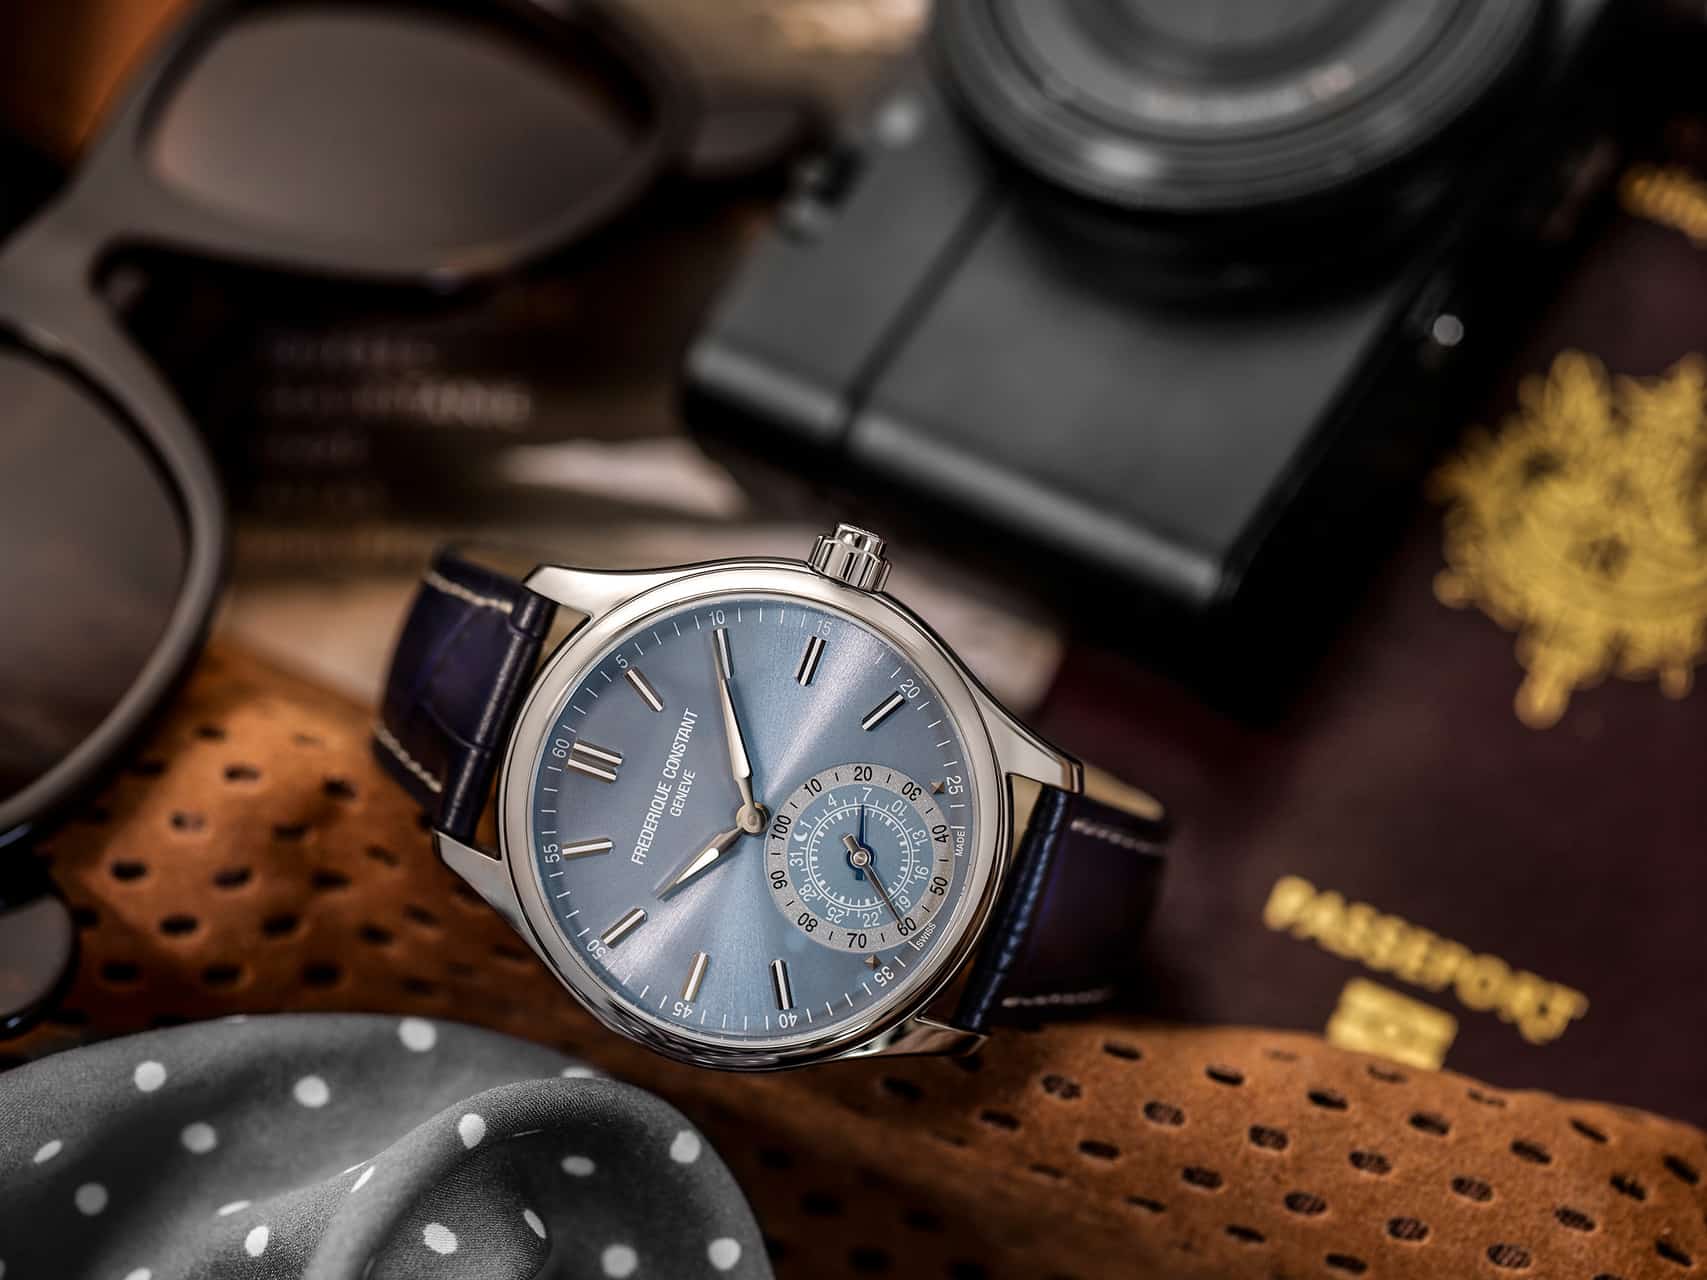 New generation Horological Smartwatches for gents now available at Frederique Constant